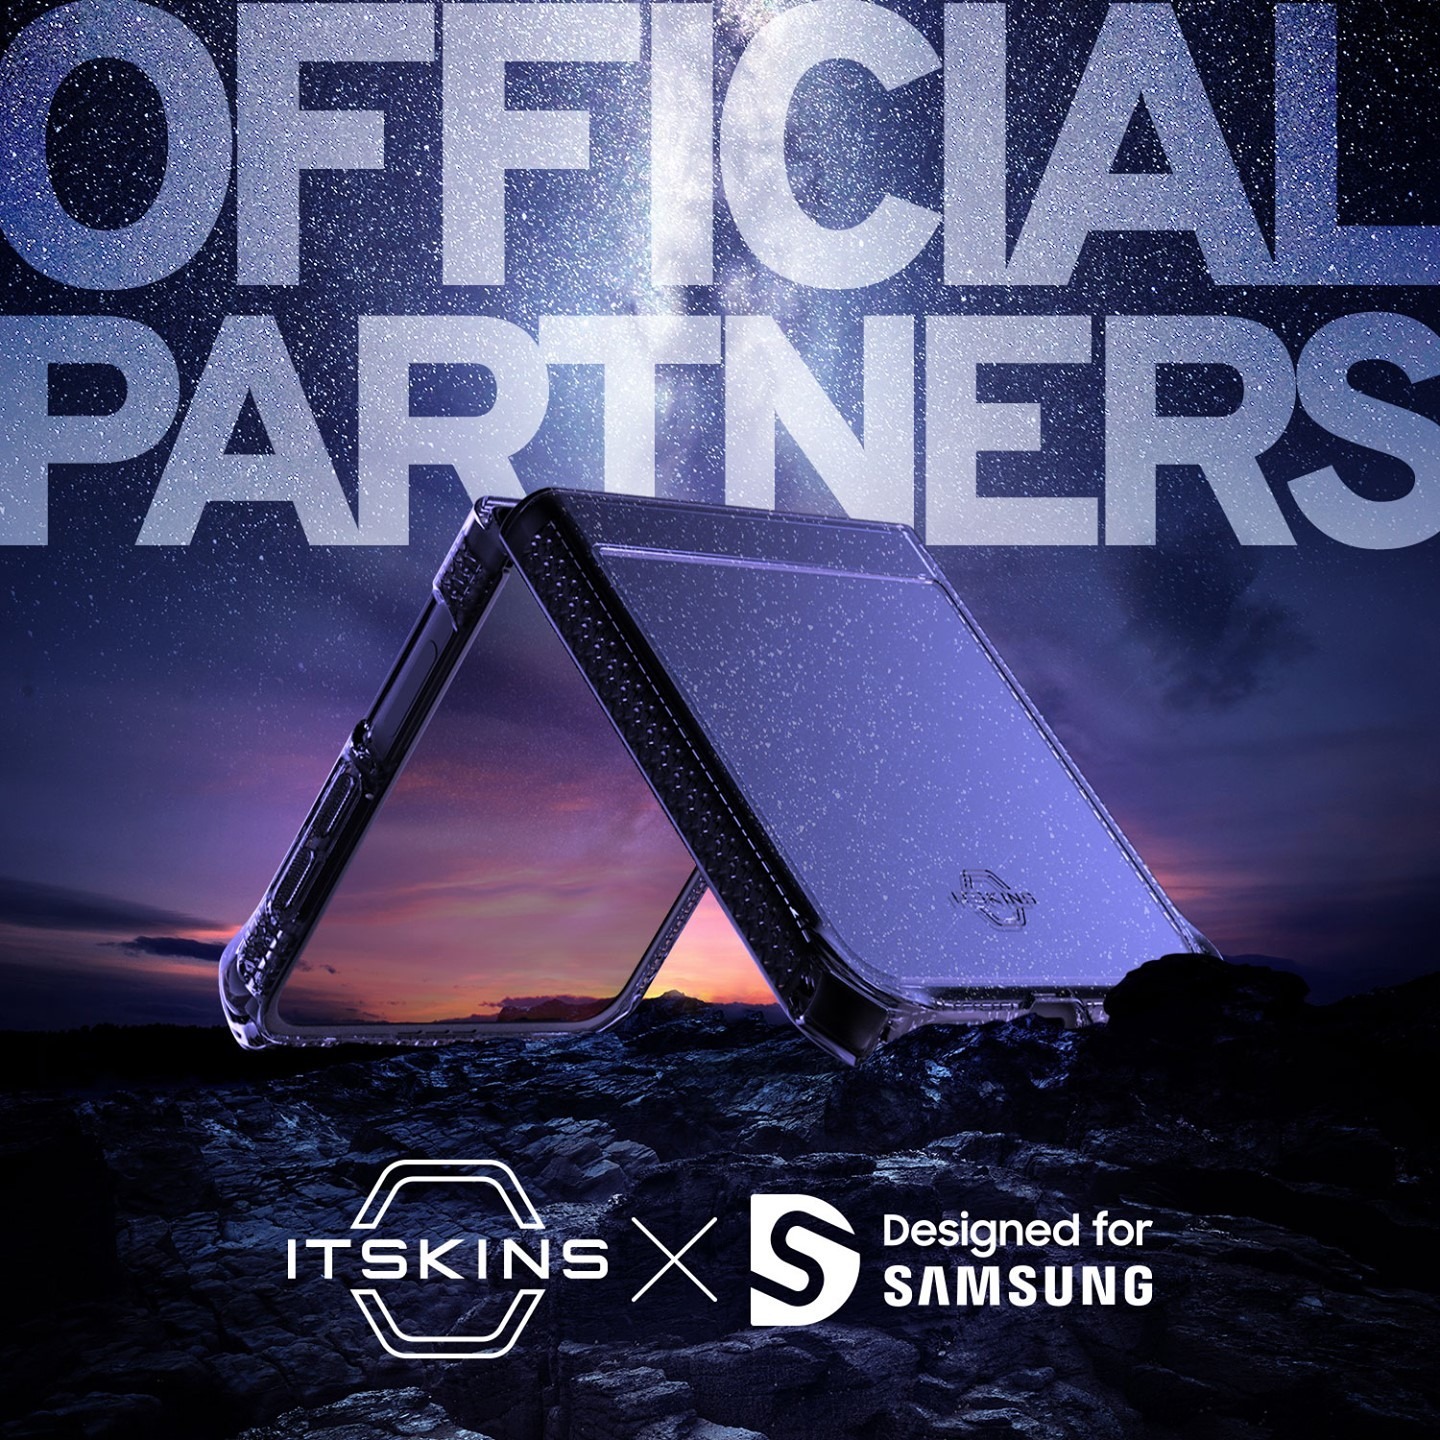 ITSKINS announces to be a official partner for Samsung devices